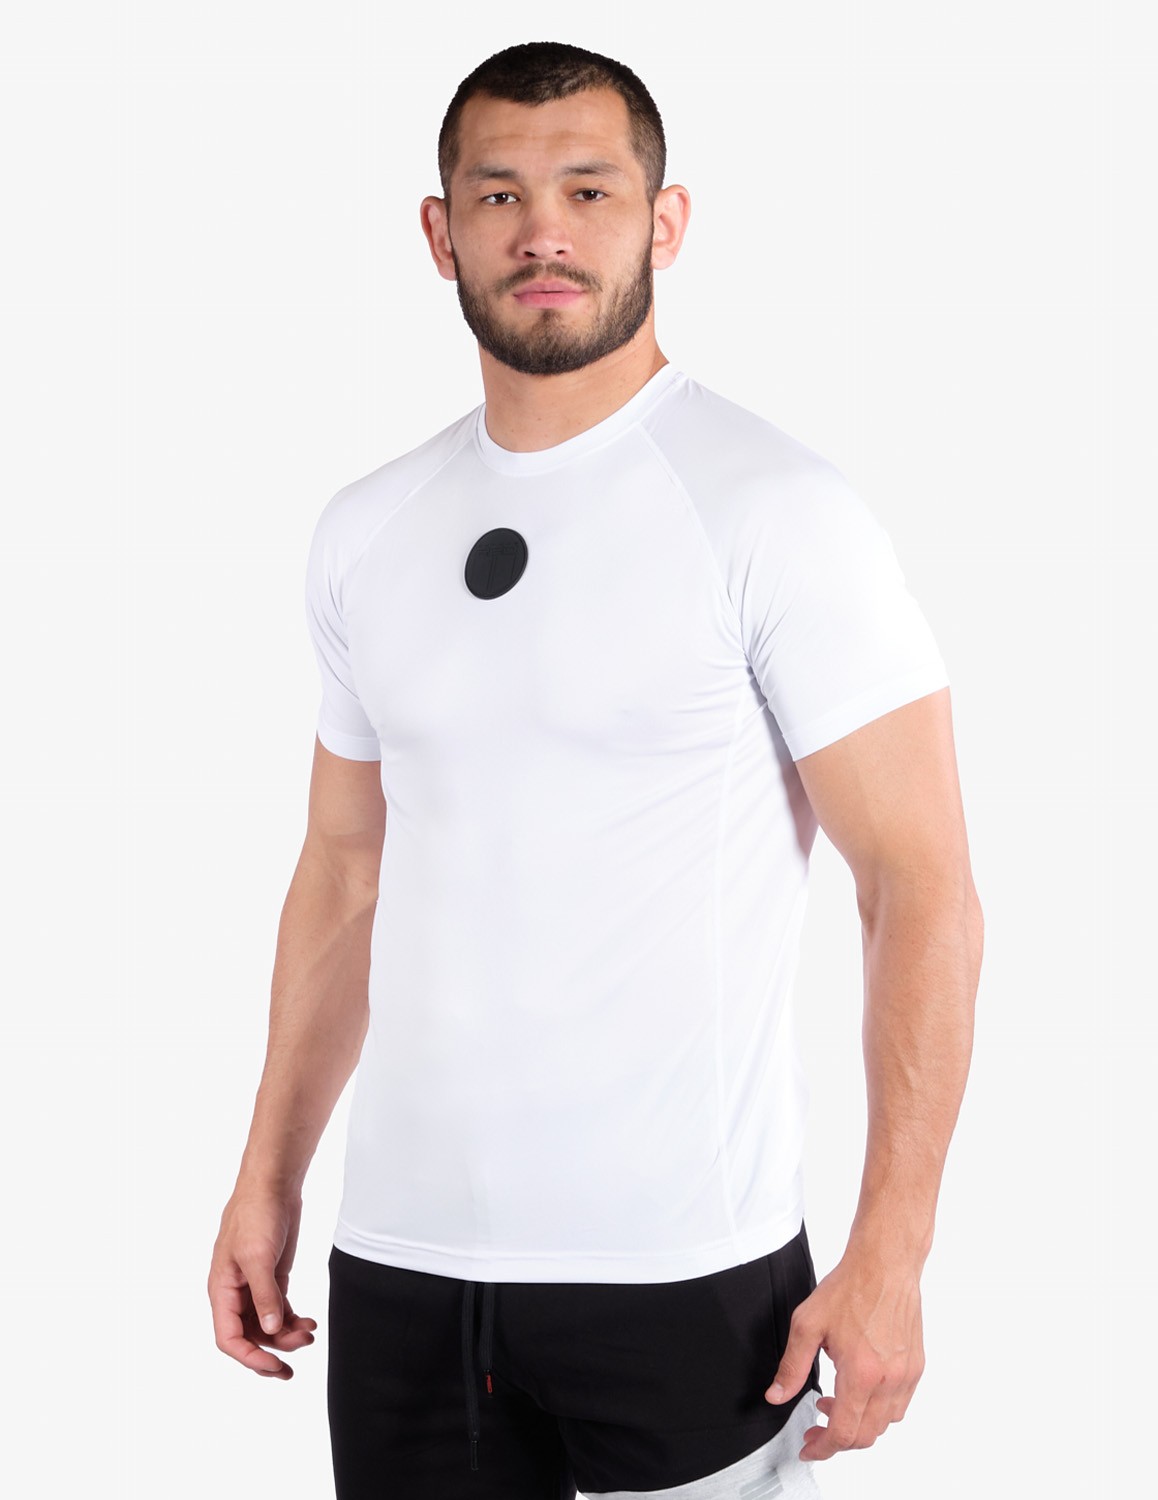 T-shirt SPORT IS YOUR GANG™ FIT+ White